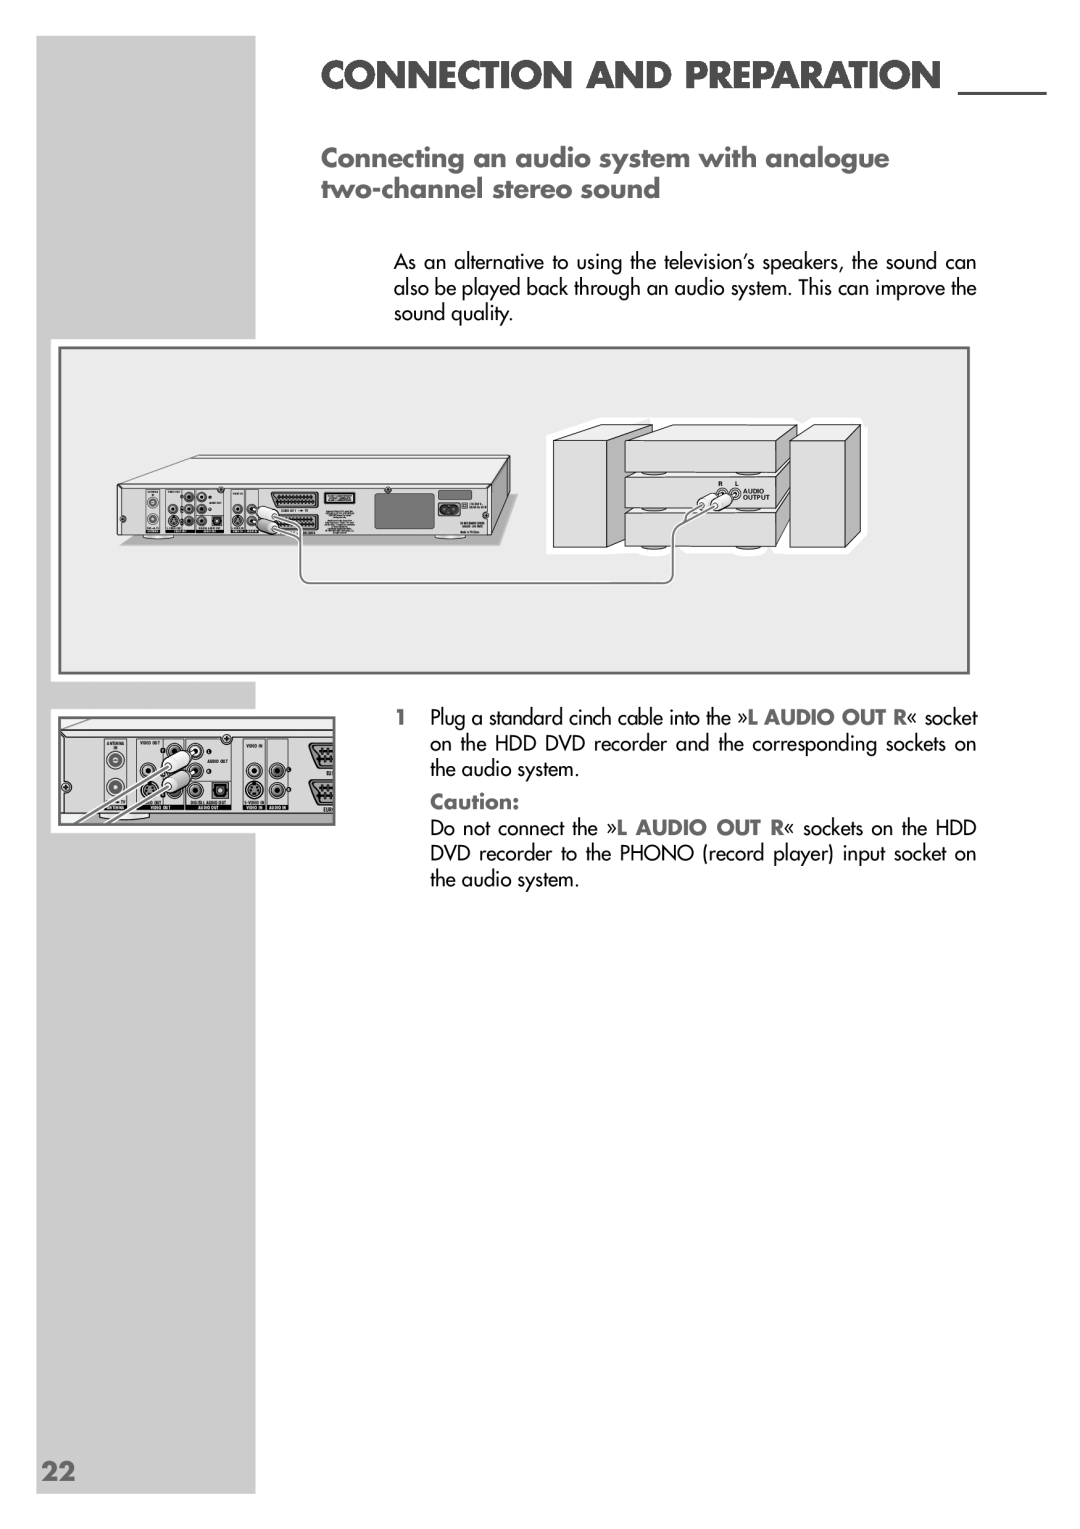 Grundig 5550 HDD manual Connecting an audio system with analogue two-channel stereo sound, Connection And Preparation 